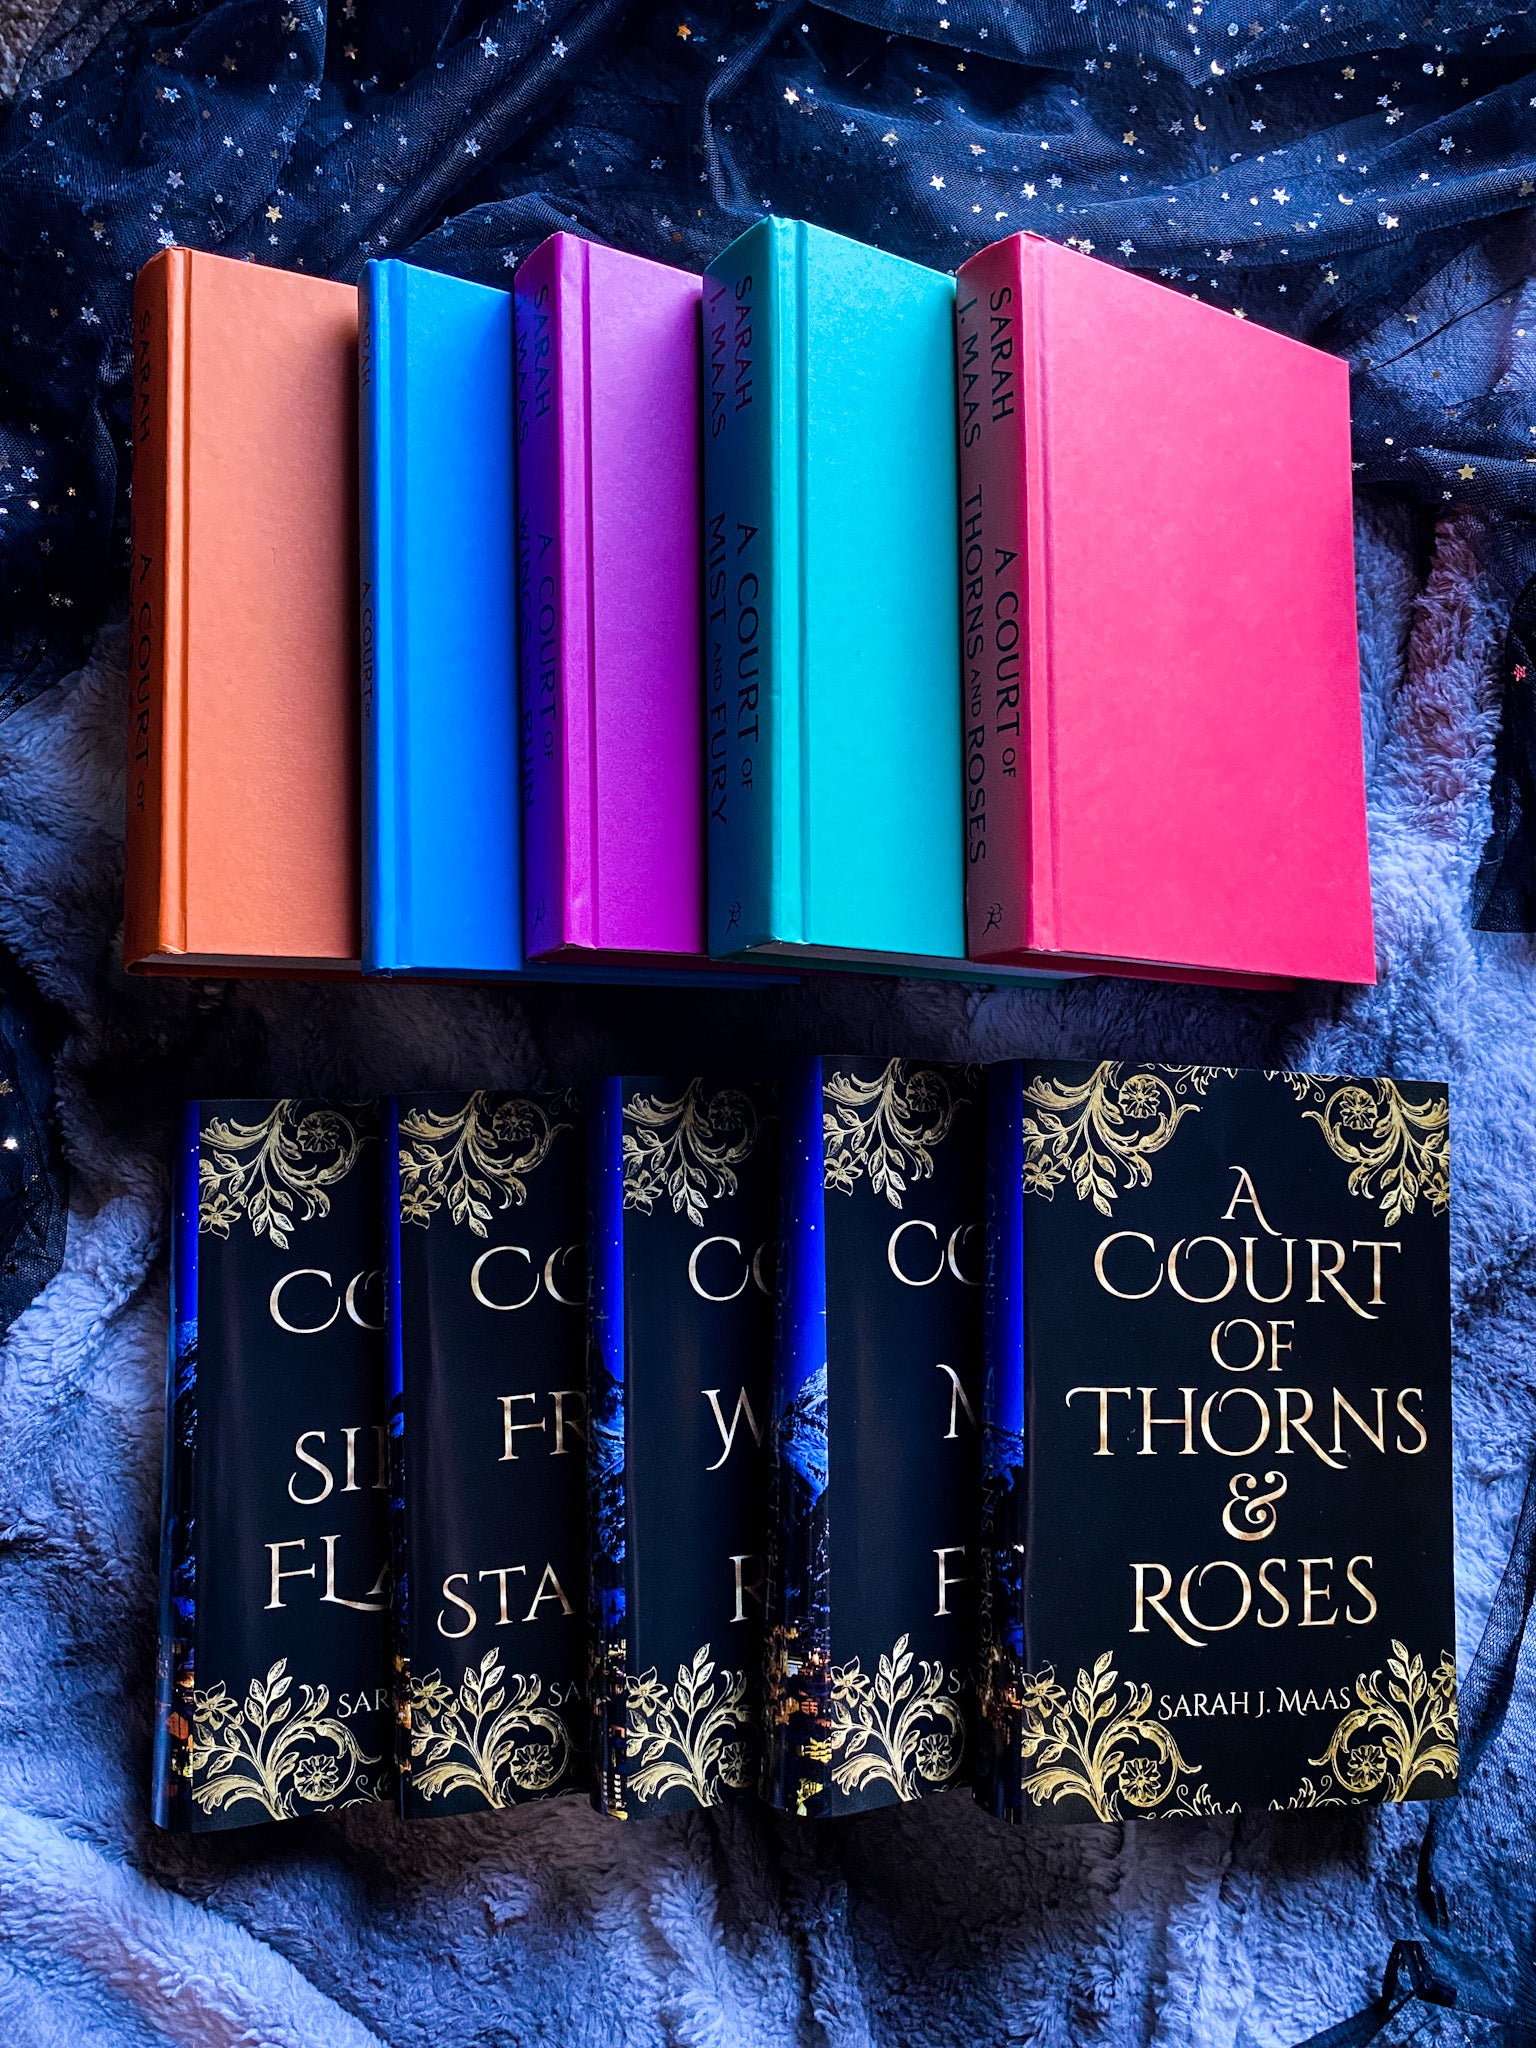 A Court of Thorns and Roses Coloring Book (EARLY EDITION Run) by Sarah J.  Maas, Paperback